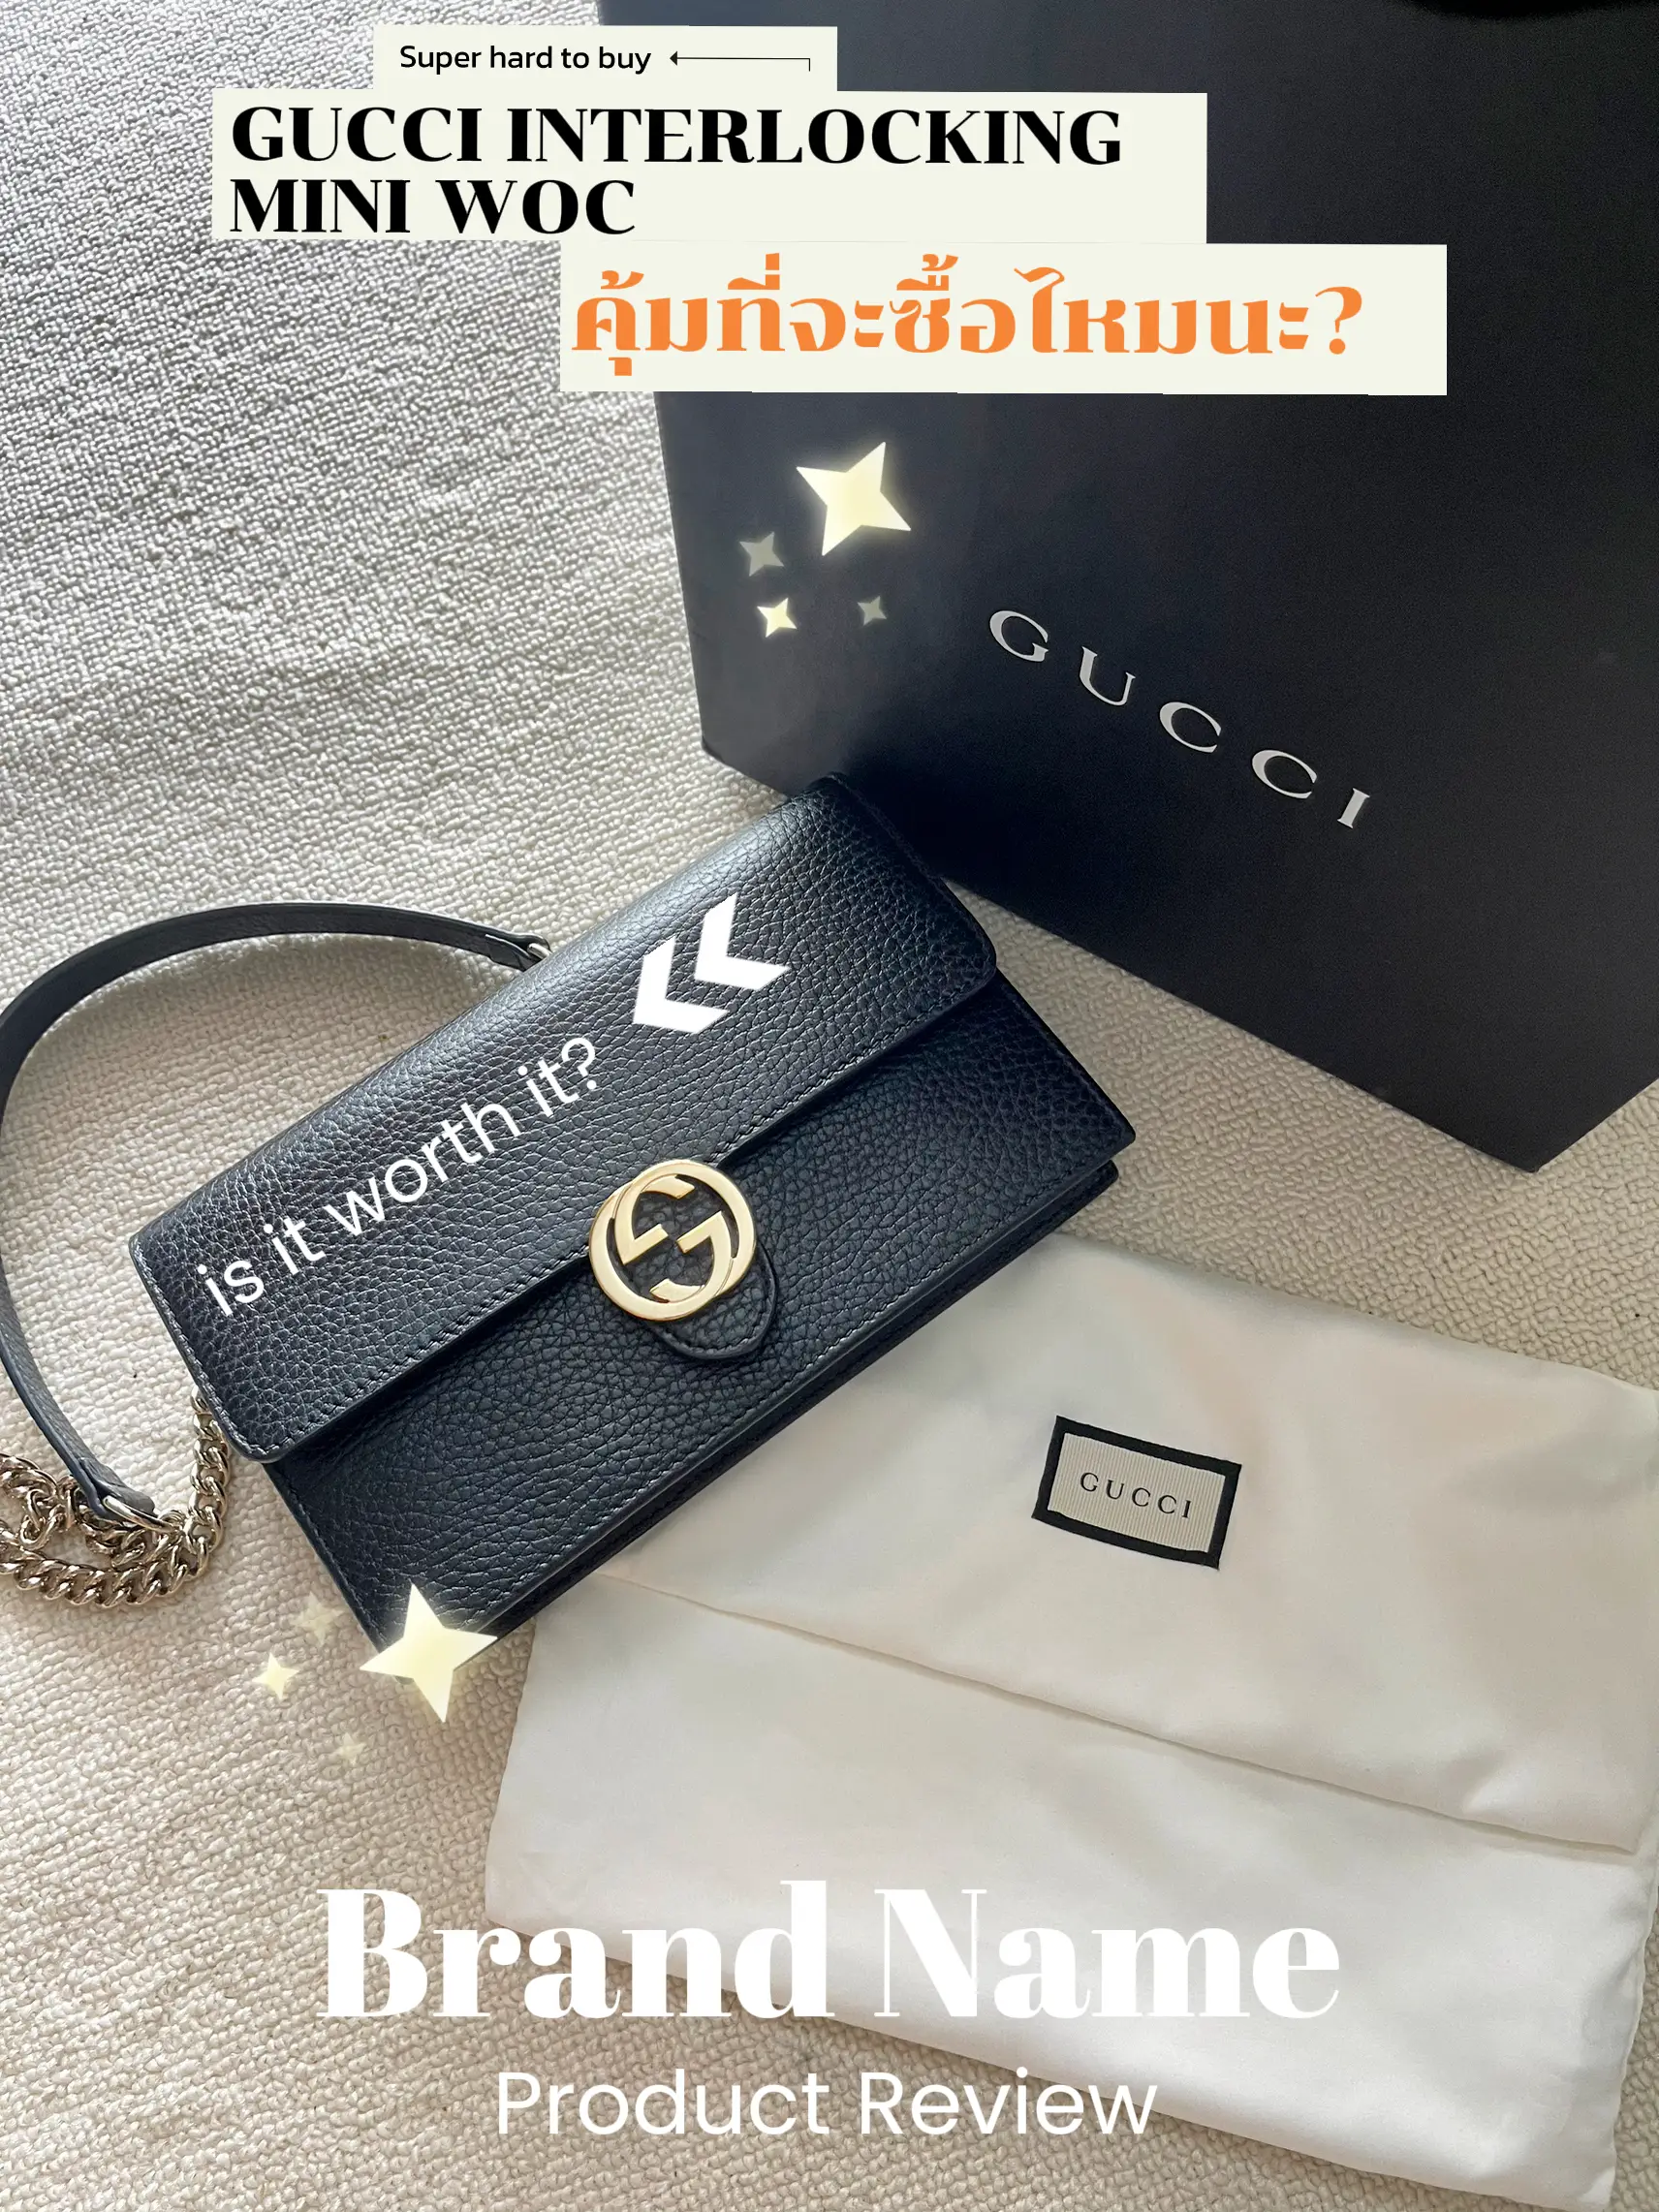 Before edit, Unboxing Gucci WOC